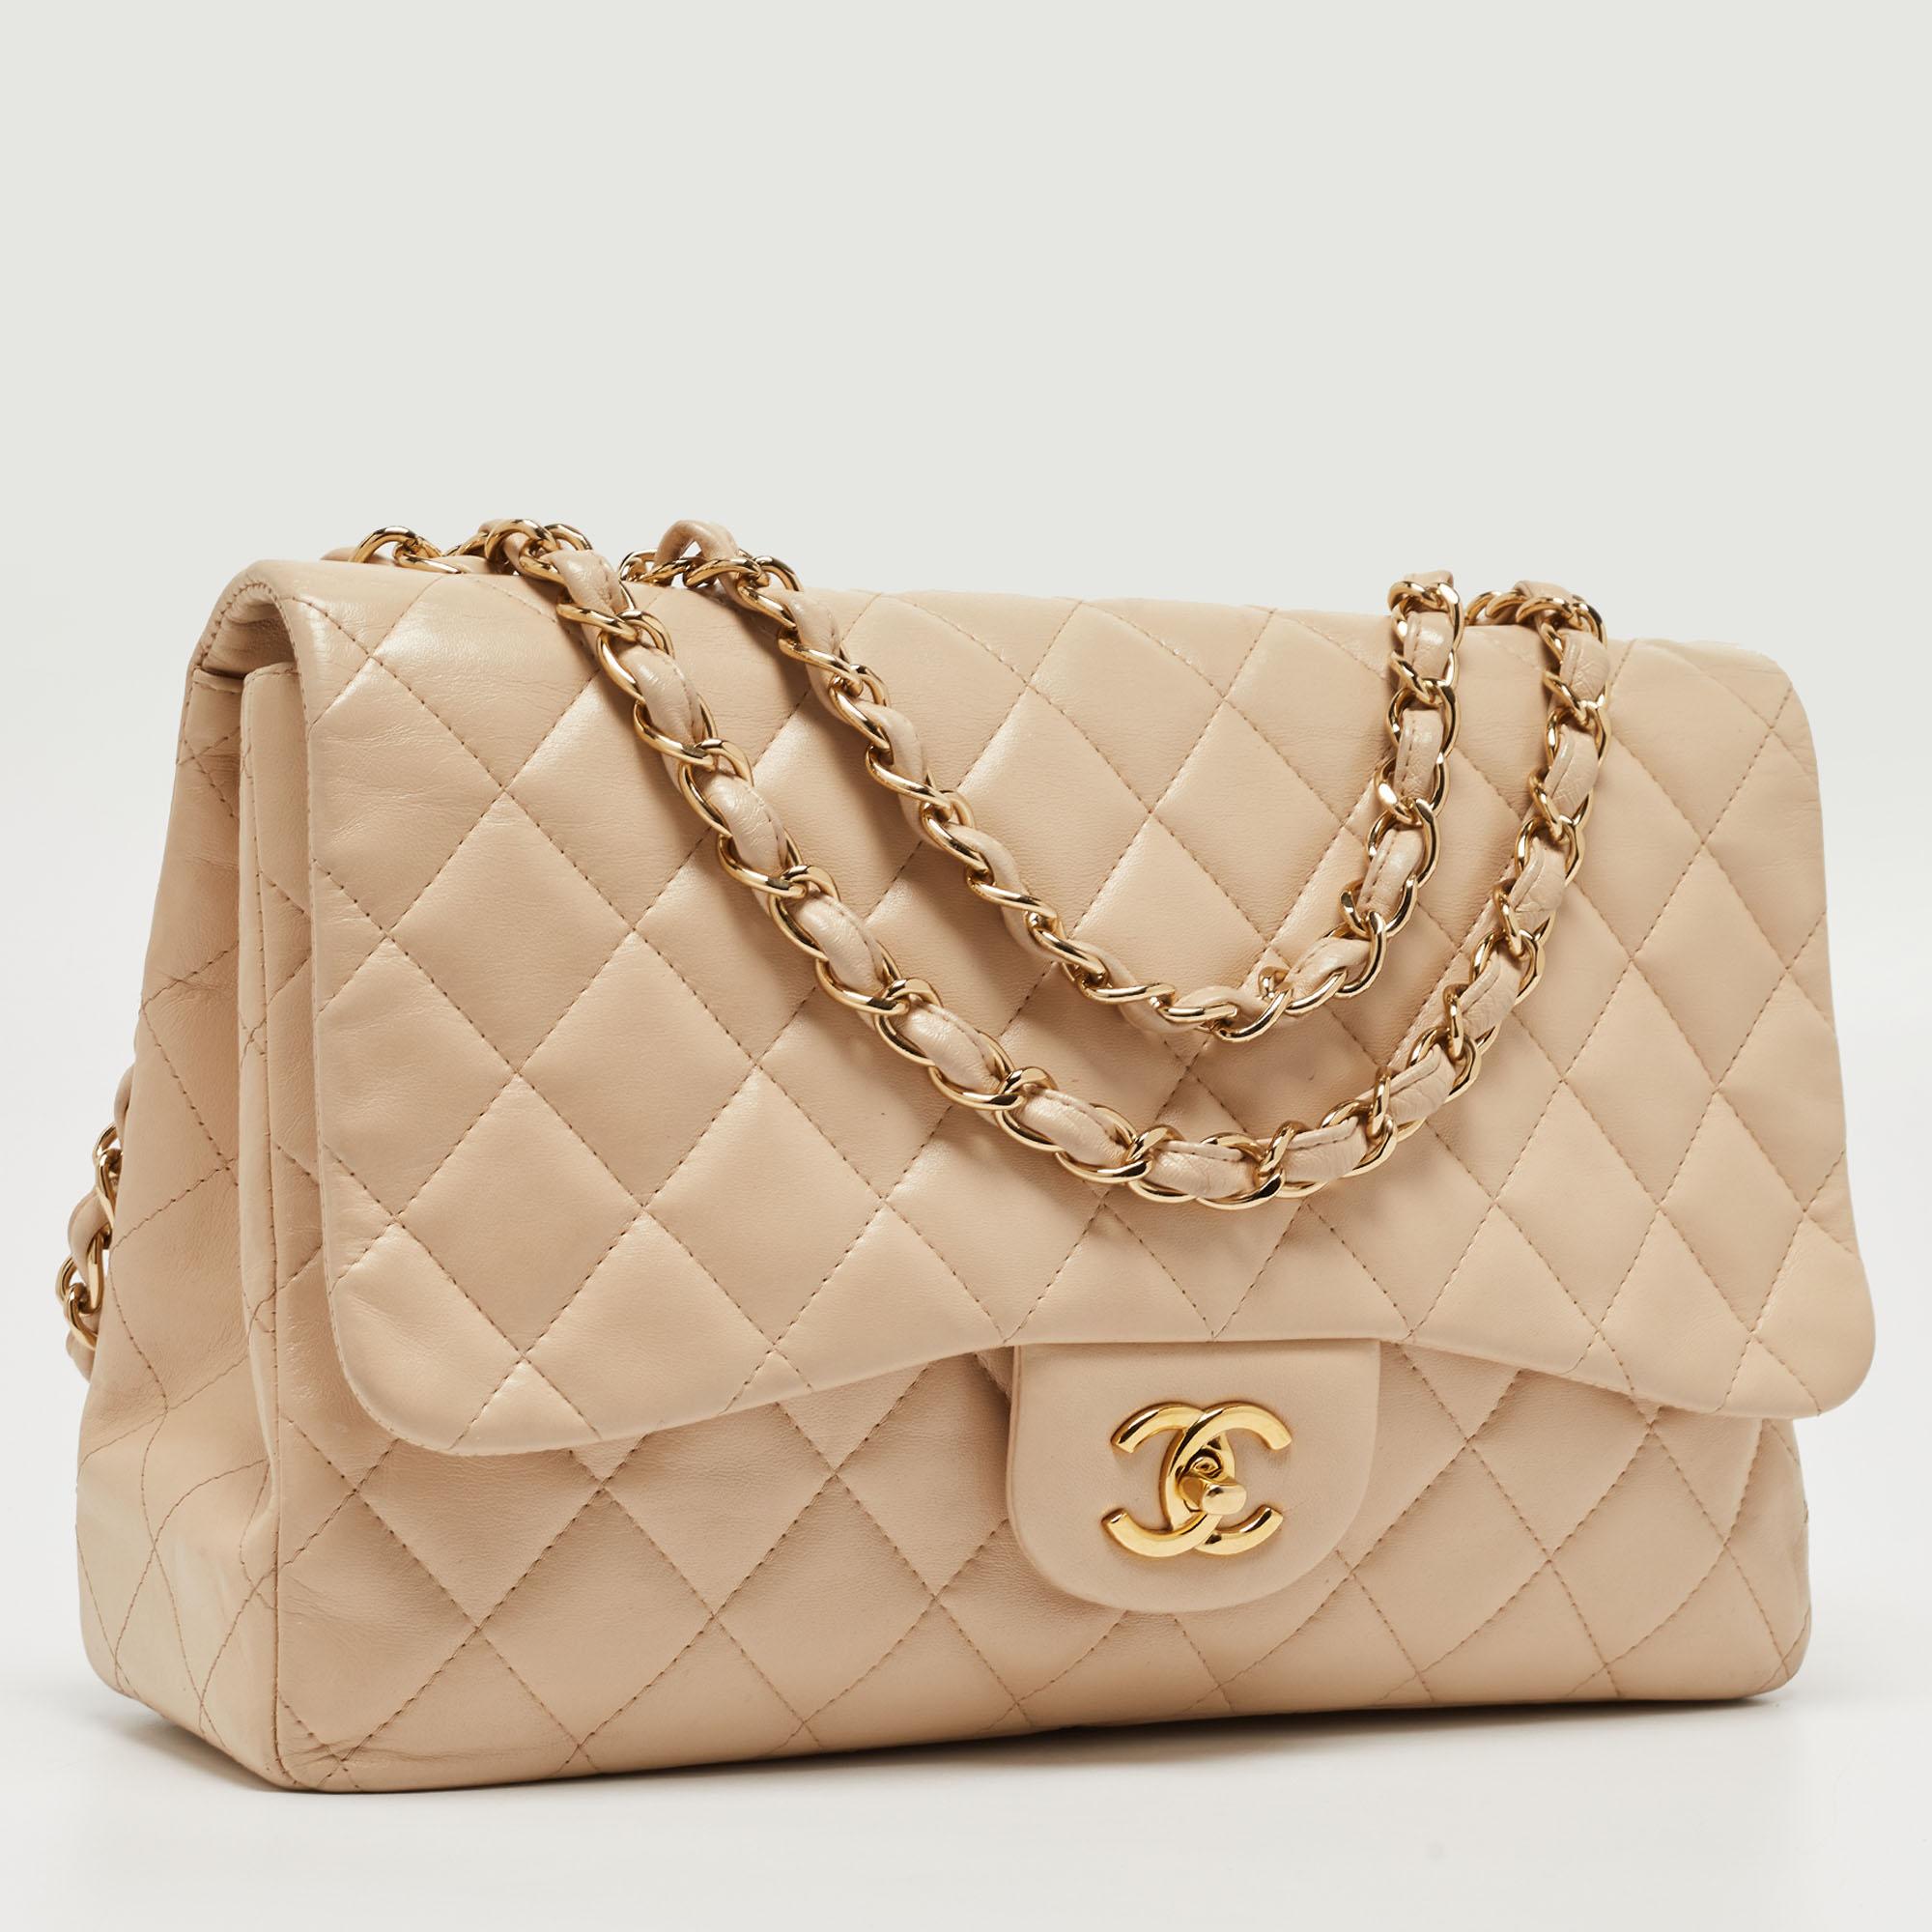 Women's Chanel Beige Quilted Leather Jumbo Classic Single Flap Bag